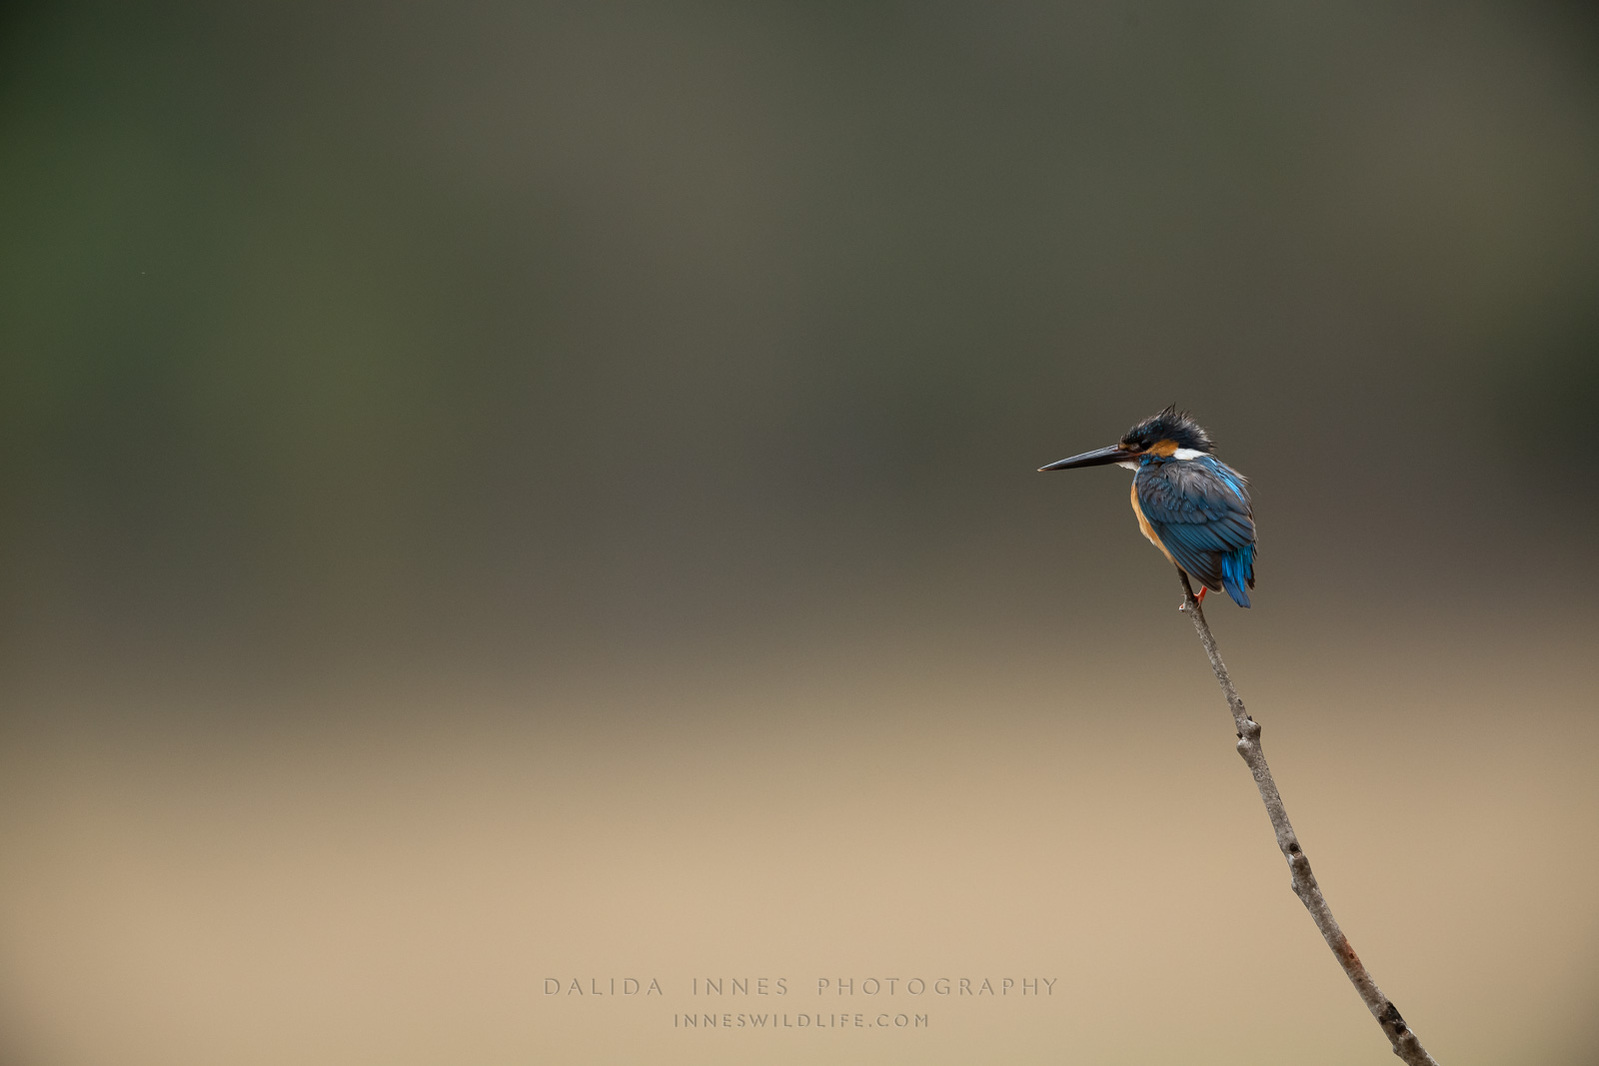 Mini kingfisher with clean background